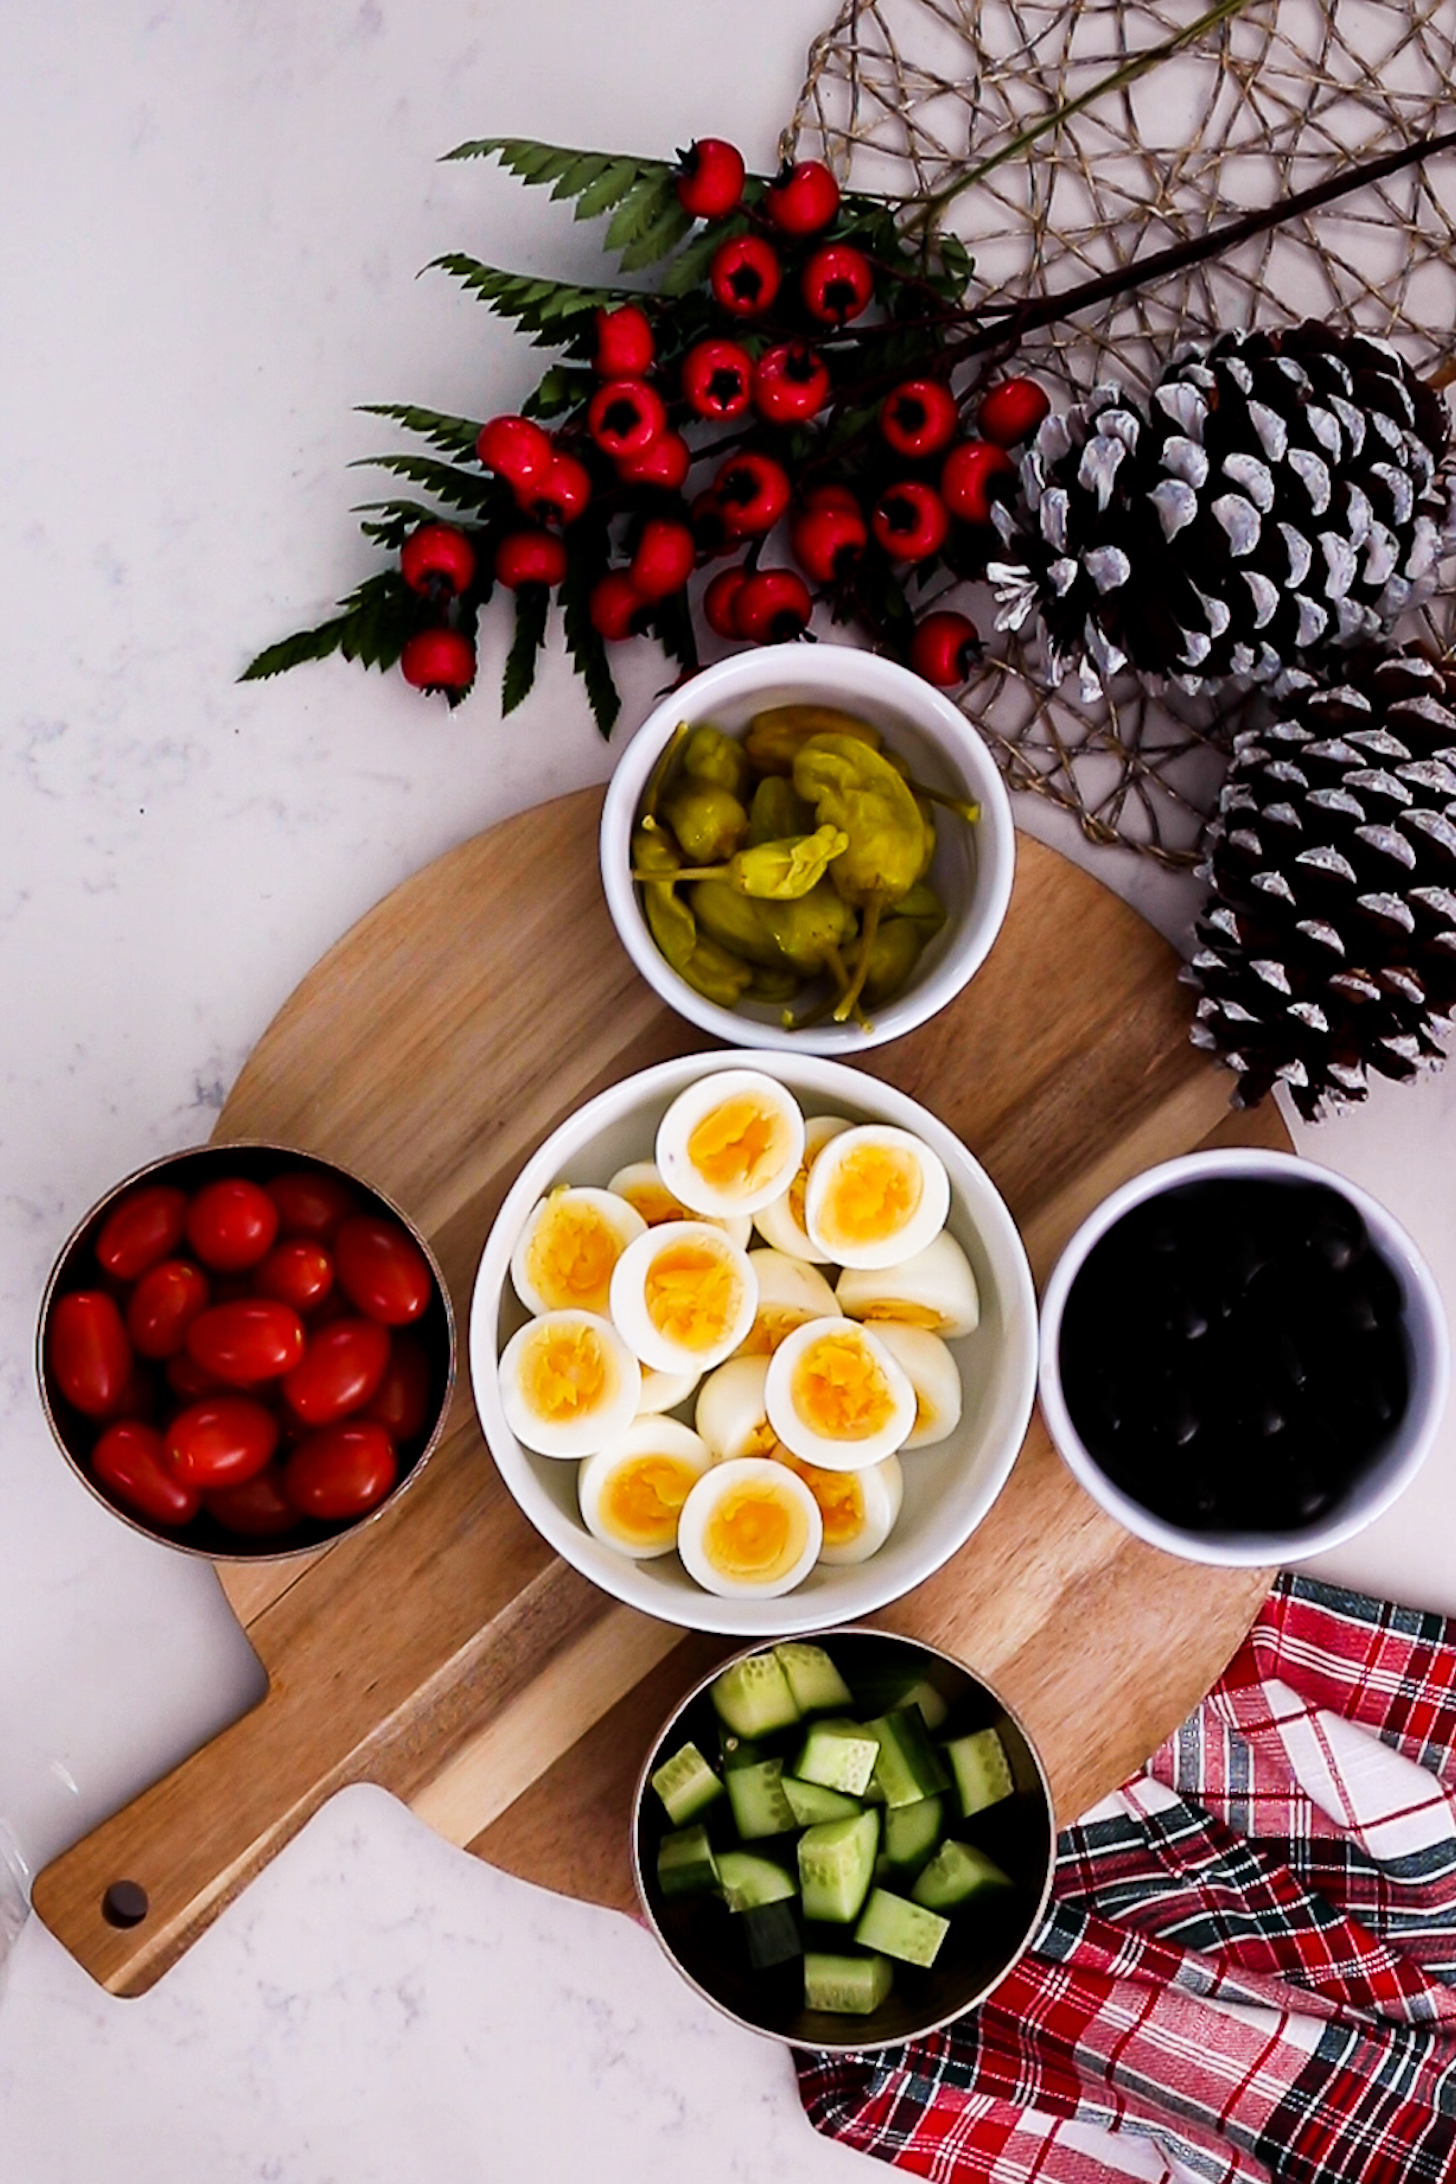 On a wooden board, various food ingredients like boiled egg halves, tomatoes, peppers, cucumber, and olives are arranged in bowls, forming a vibrant collection.